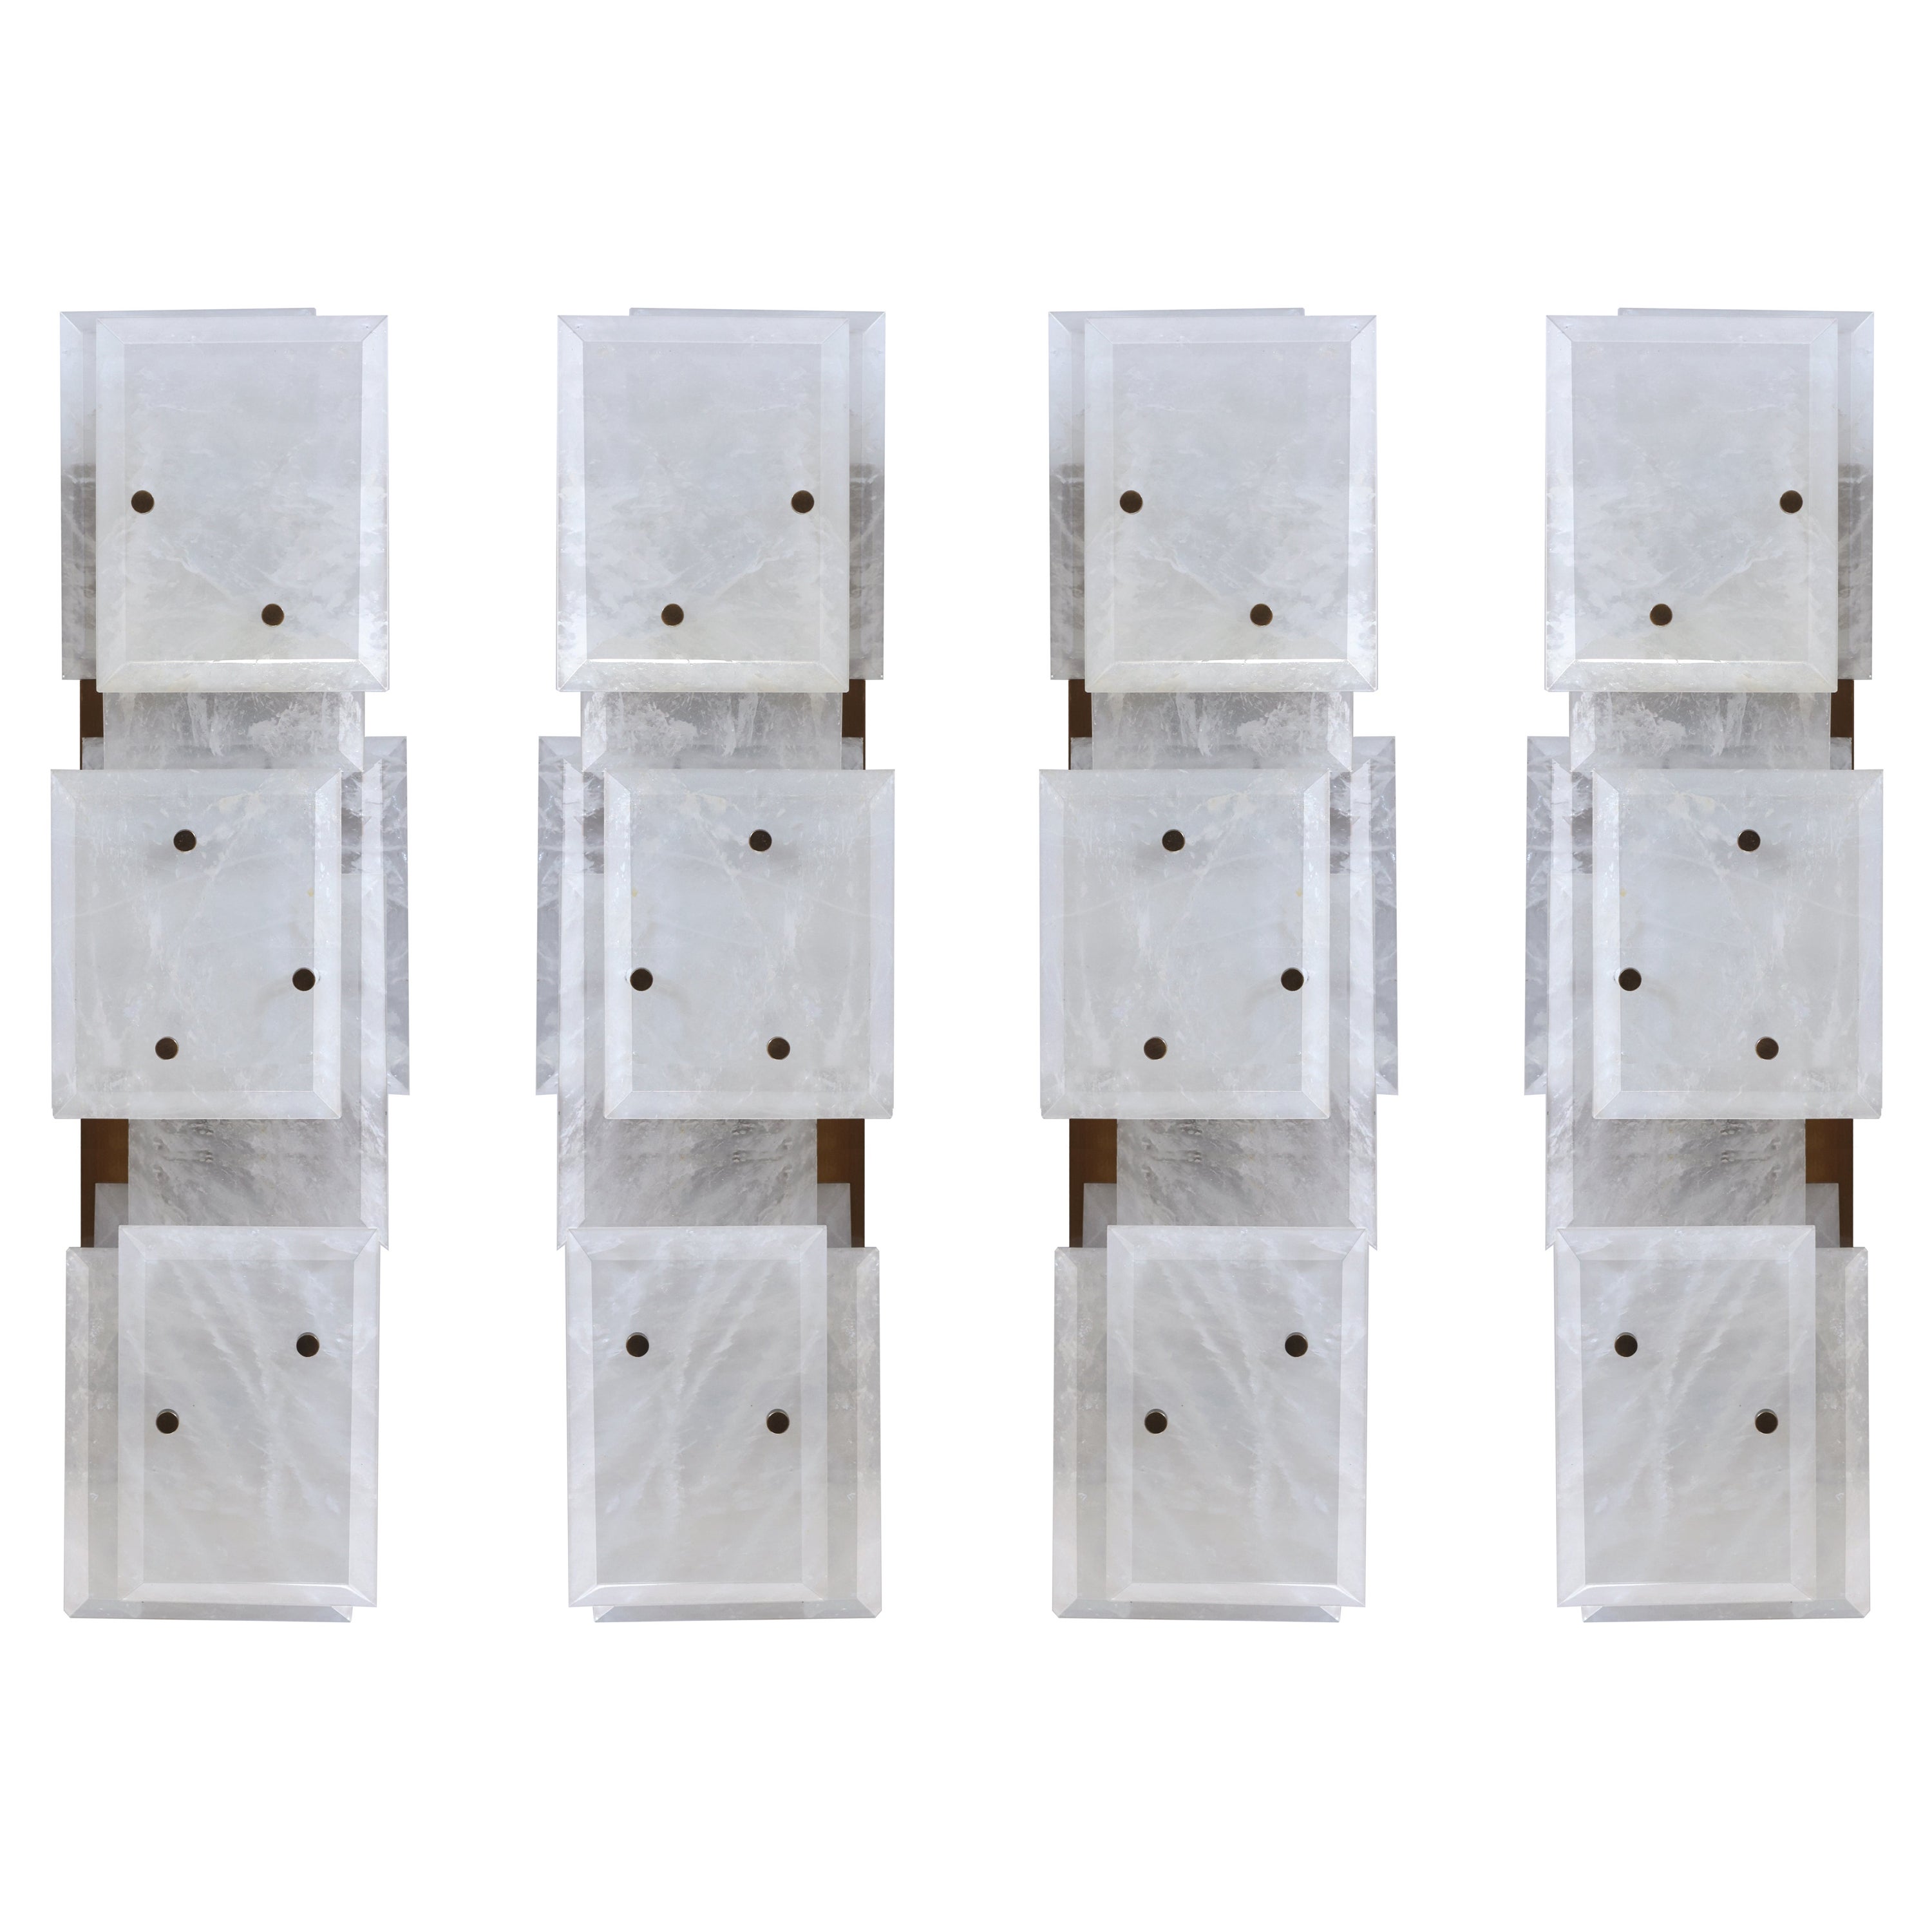 Group of Four CPS 18 II Sconces by Phoenix